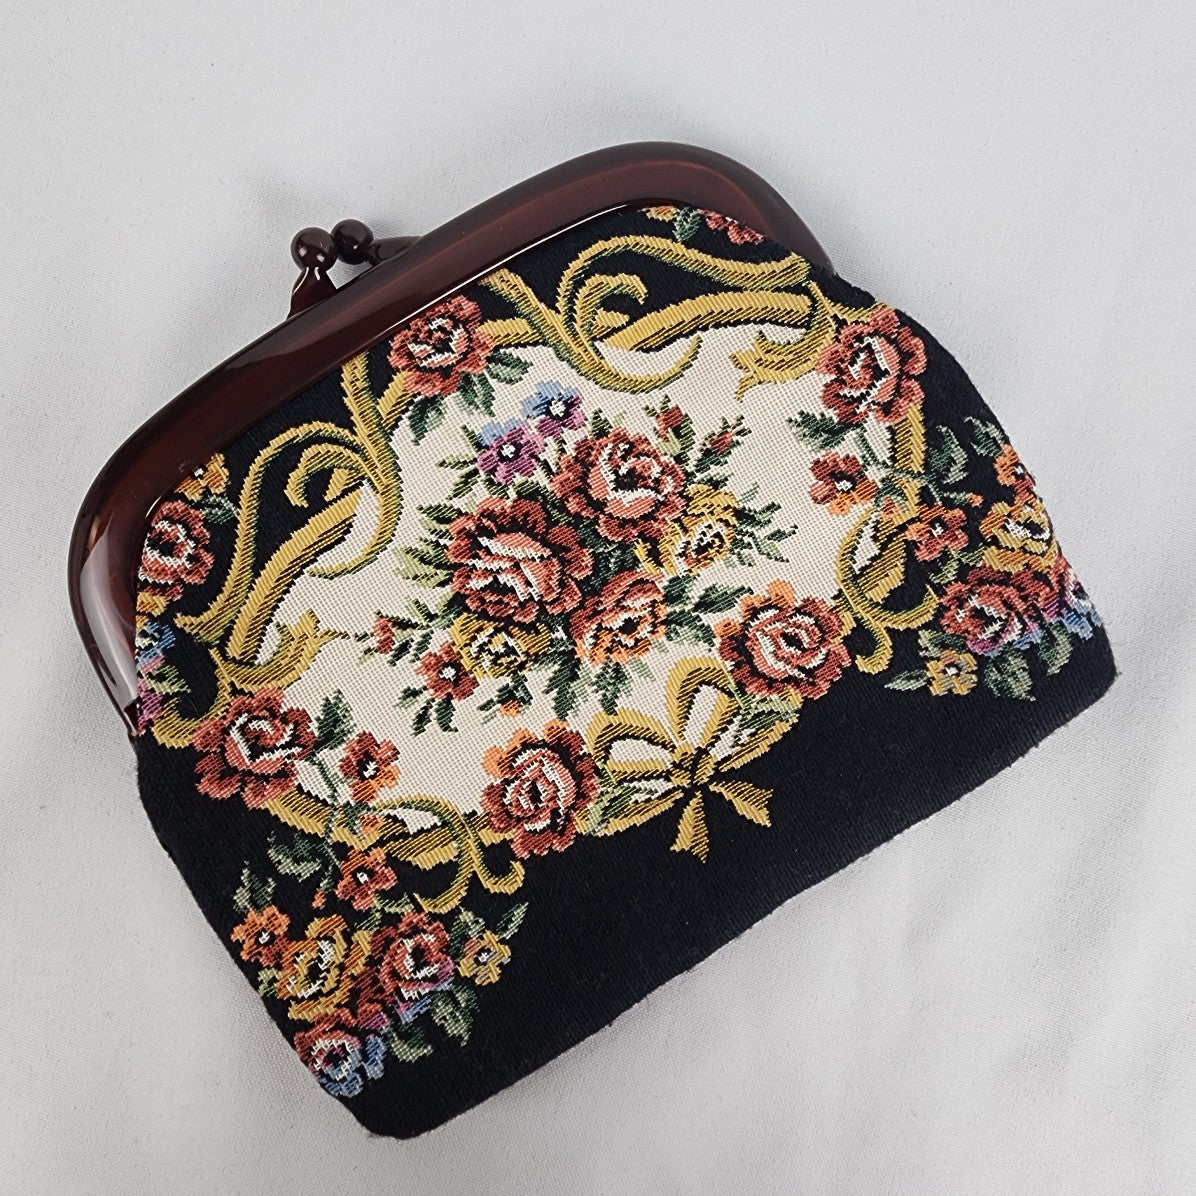 Vintage Brown Floral Embroidered Clutch Purse